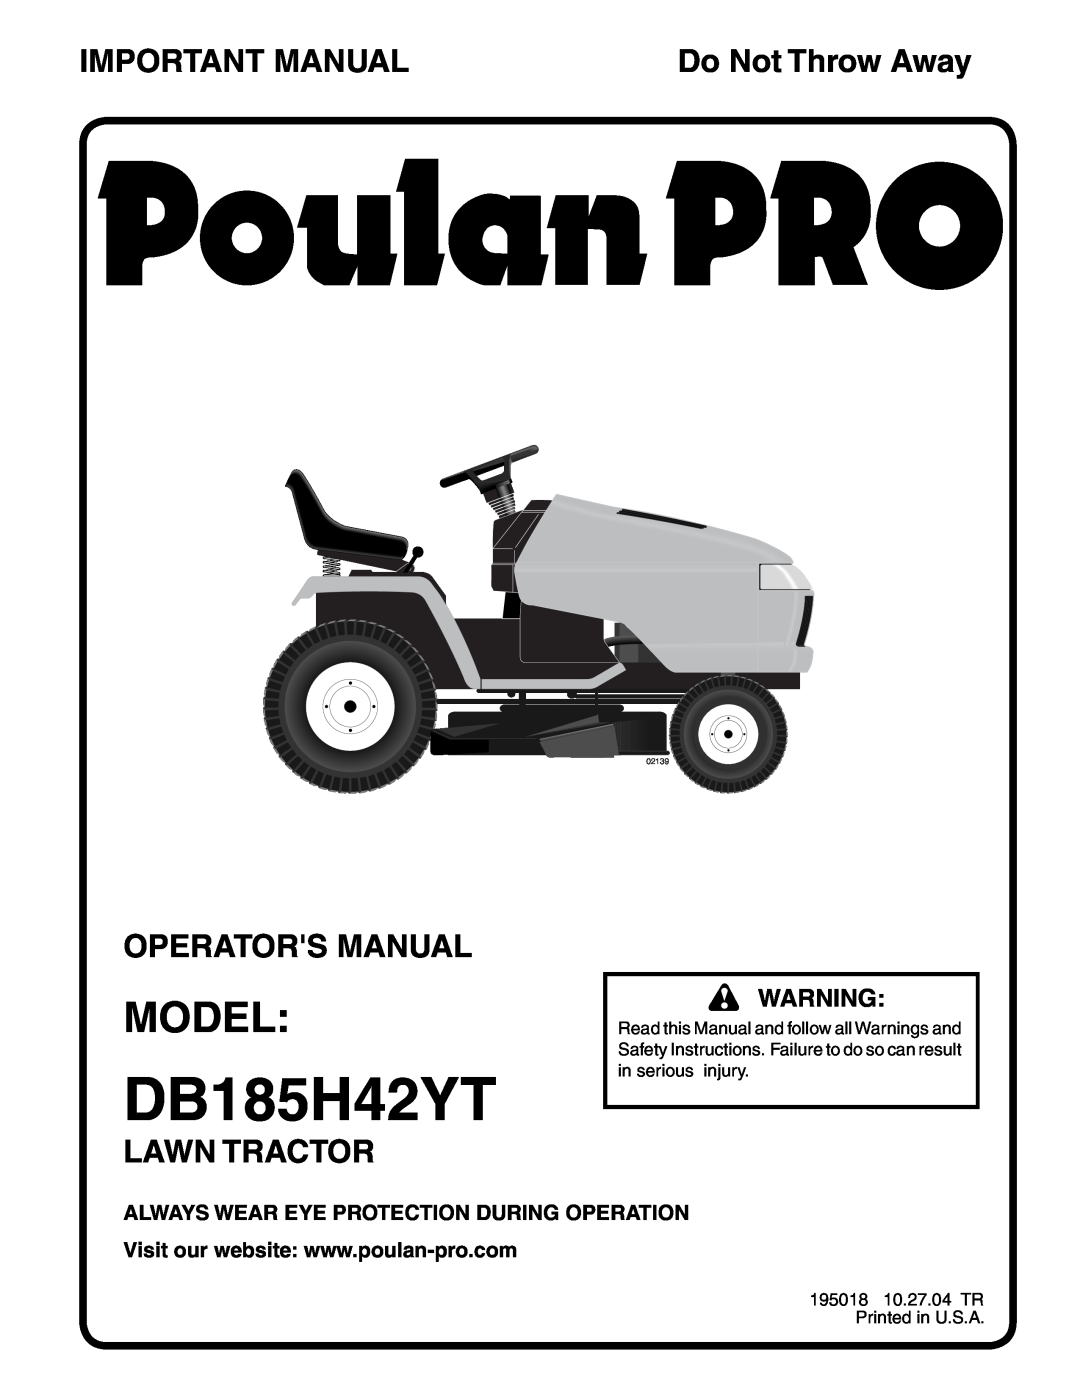 Poulan 195018 manual Model, Important Manual, Operators Manual, Lawn Tractor, Always Wear Eye Protection During Operation 